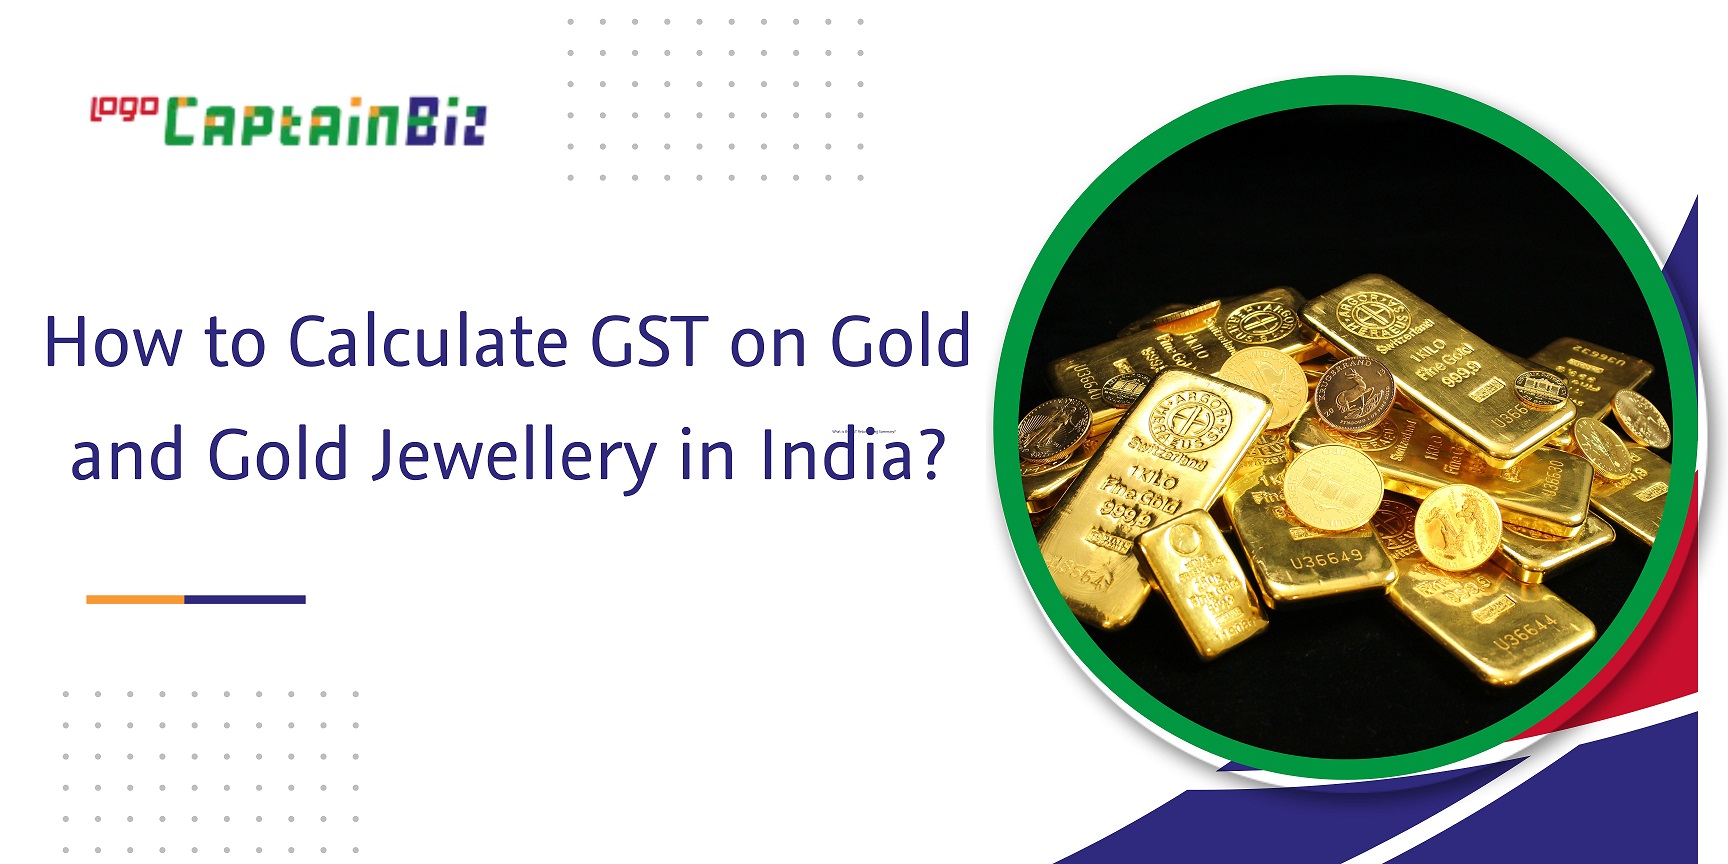 CaptainBiz: how to calculate gst on gold and gold jewellery in india